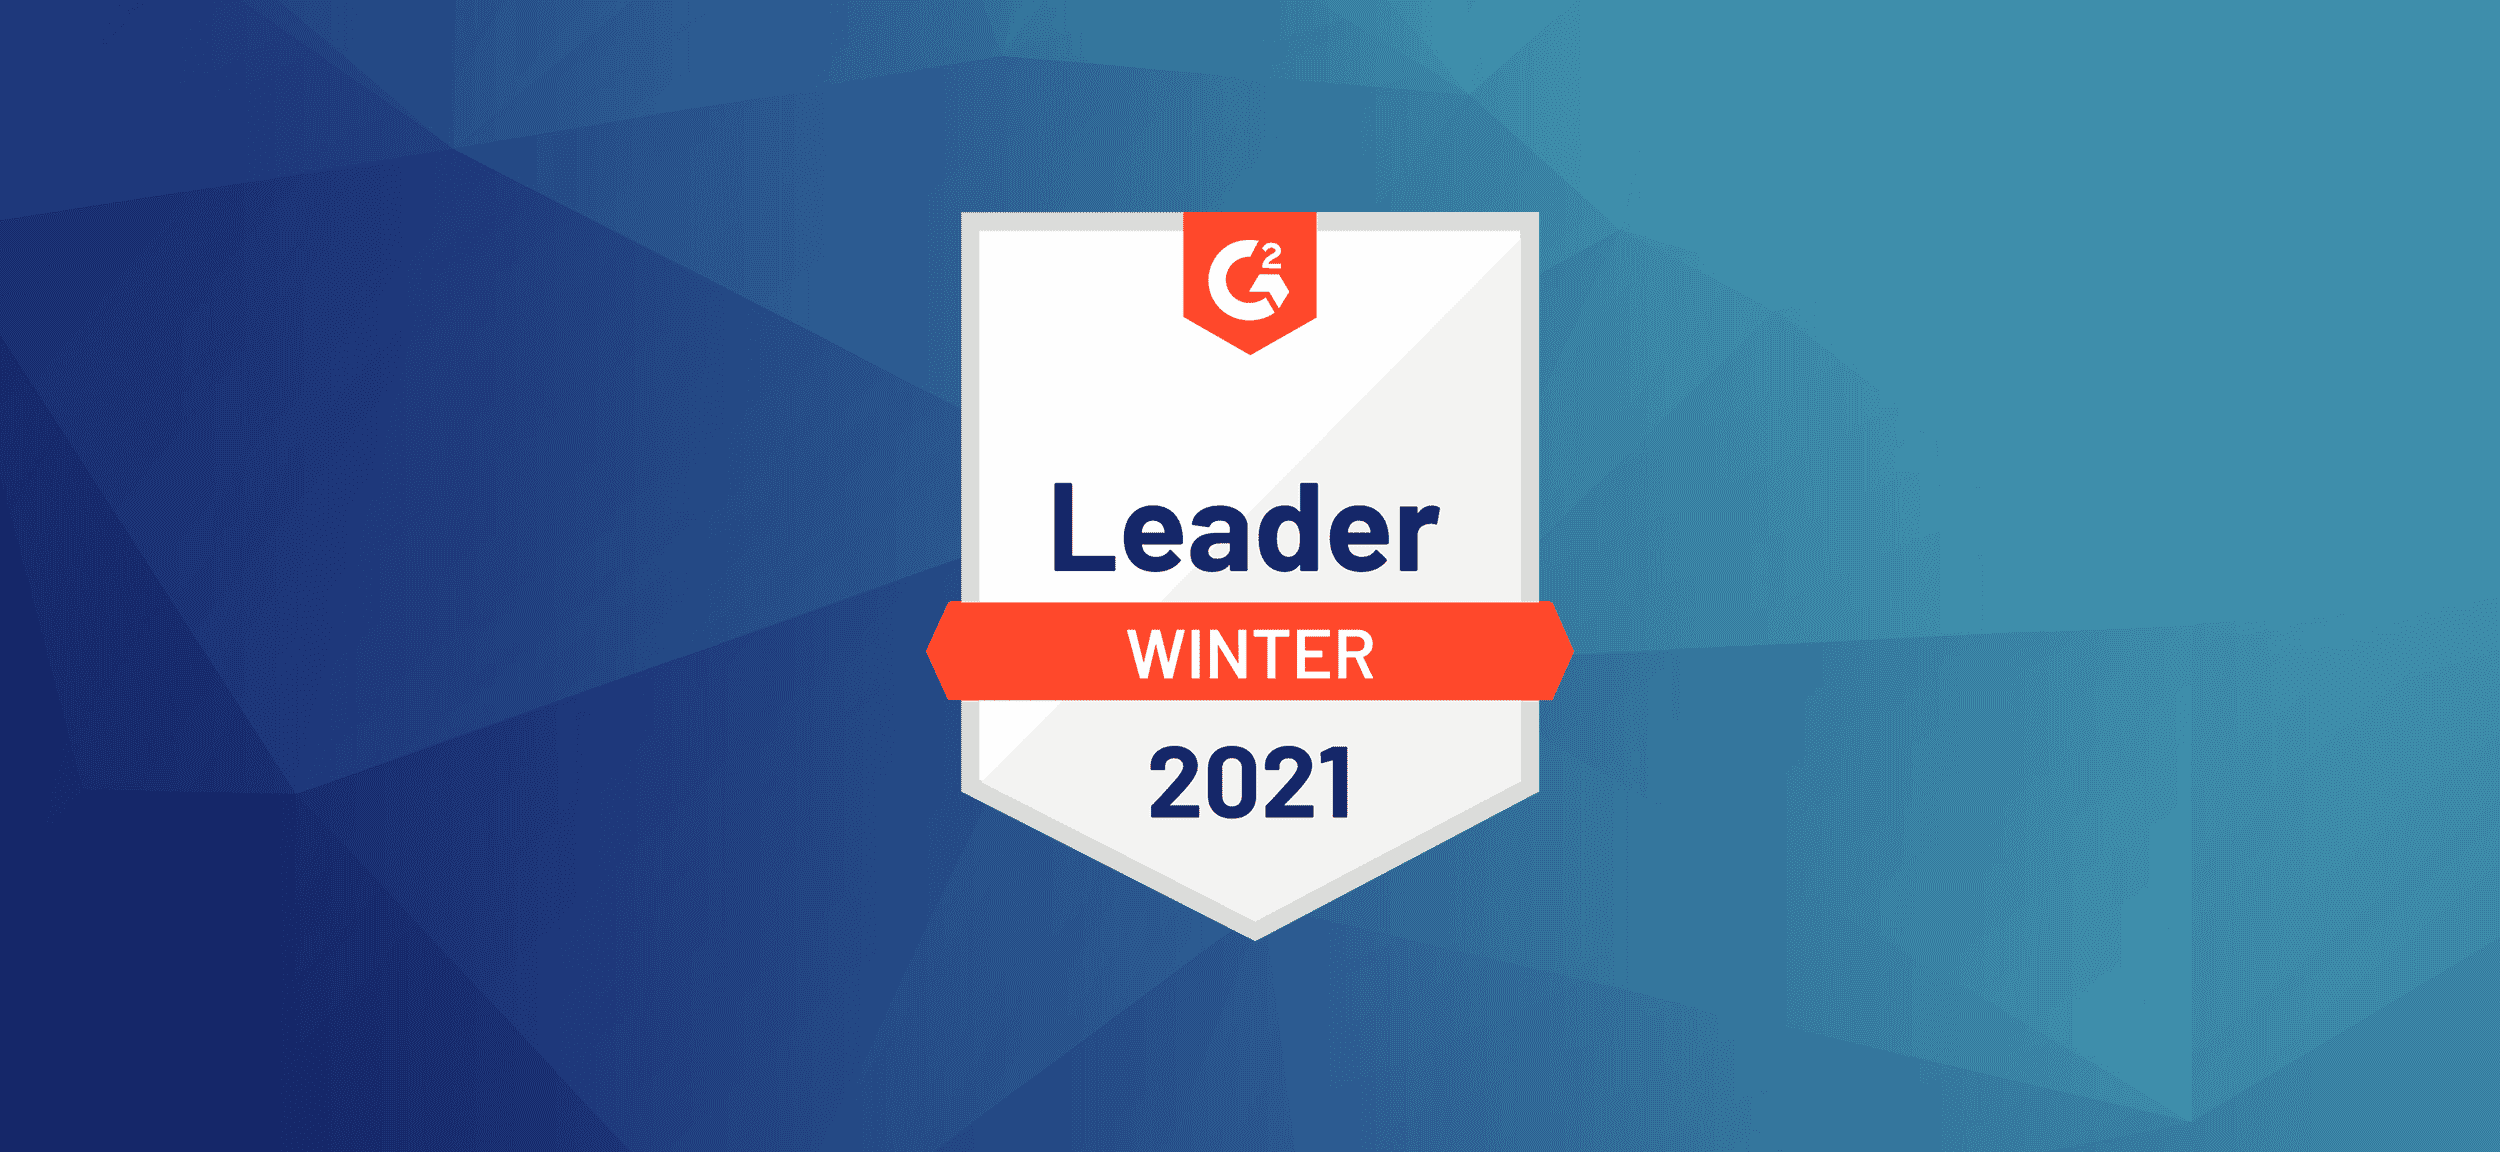 TUNE Named a Leader in 7 Categories in G2's Winter 2021 Grid Reports